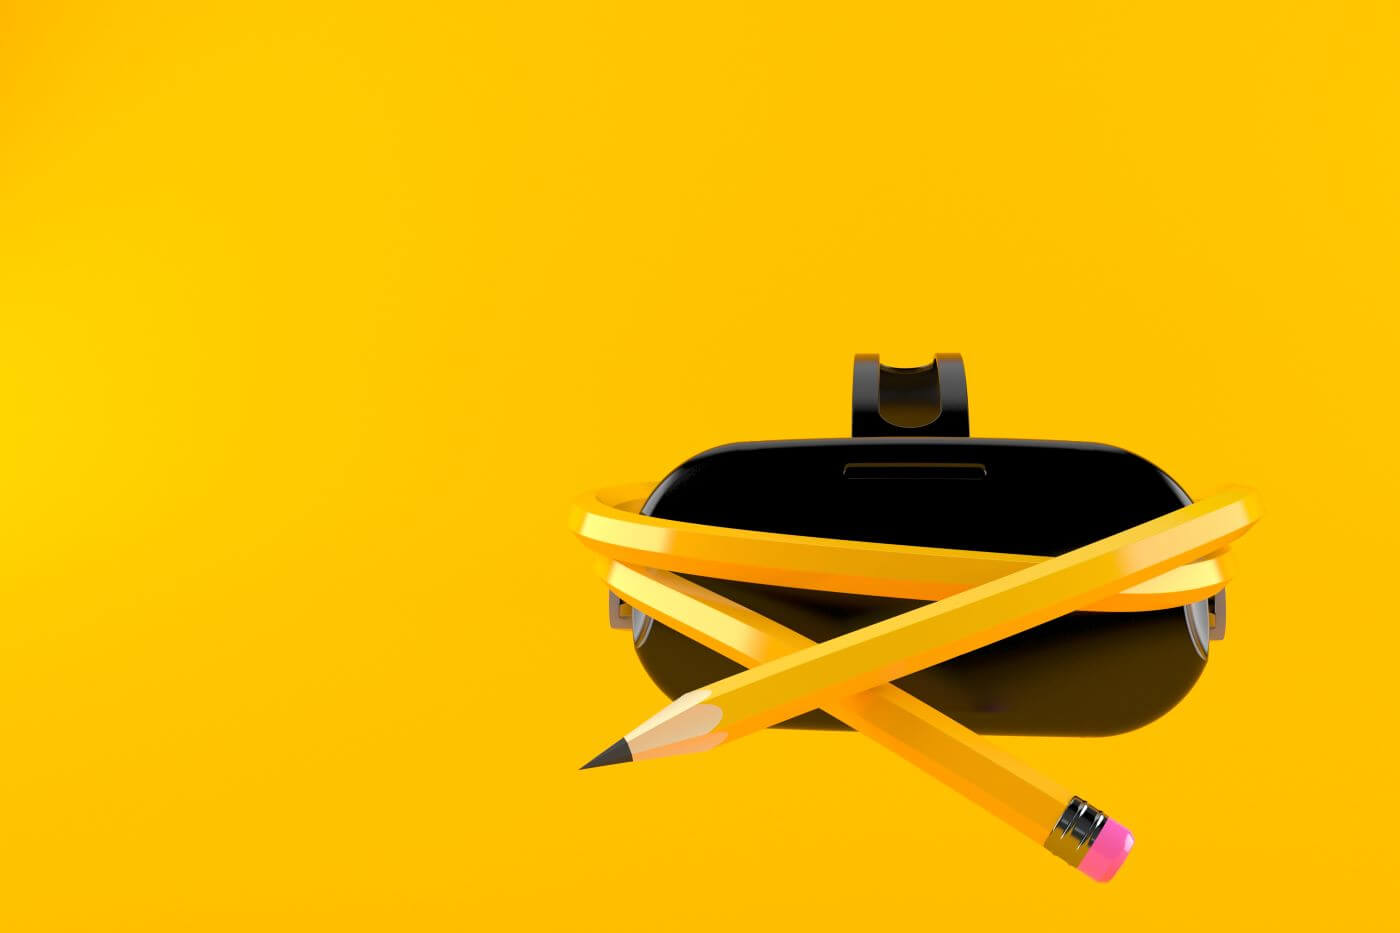 XR Education in 2021 - VR headset with pencil isolated on orange background